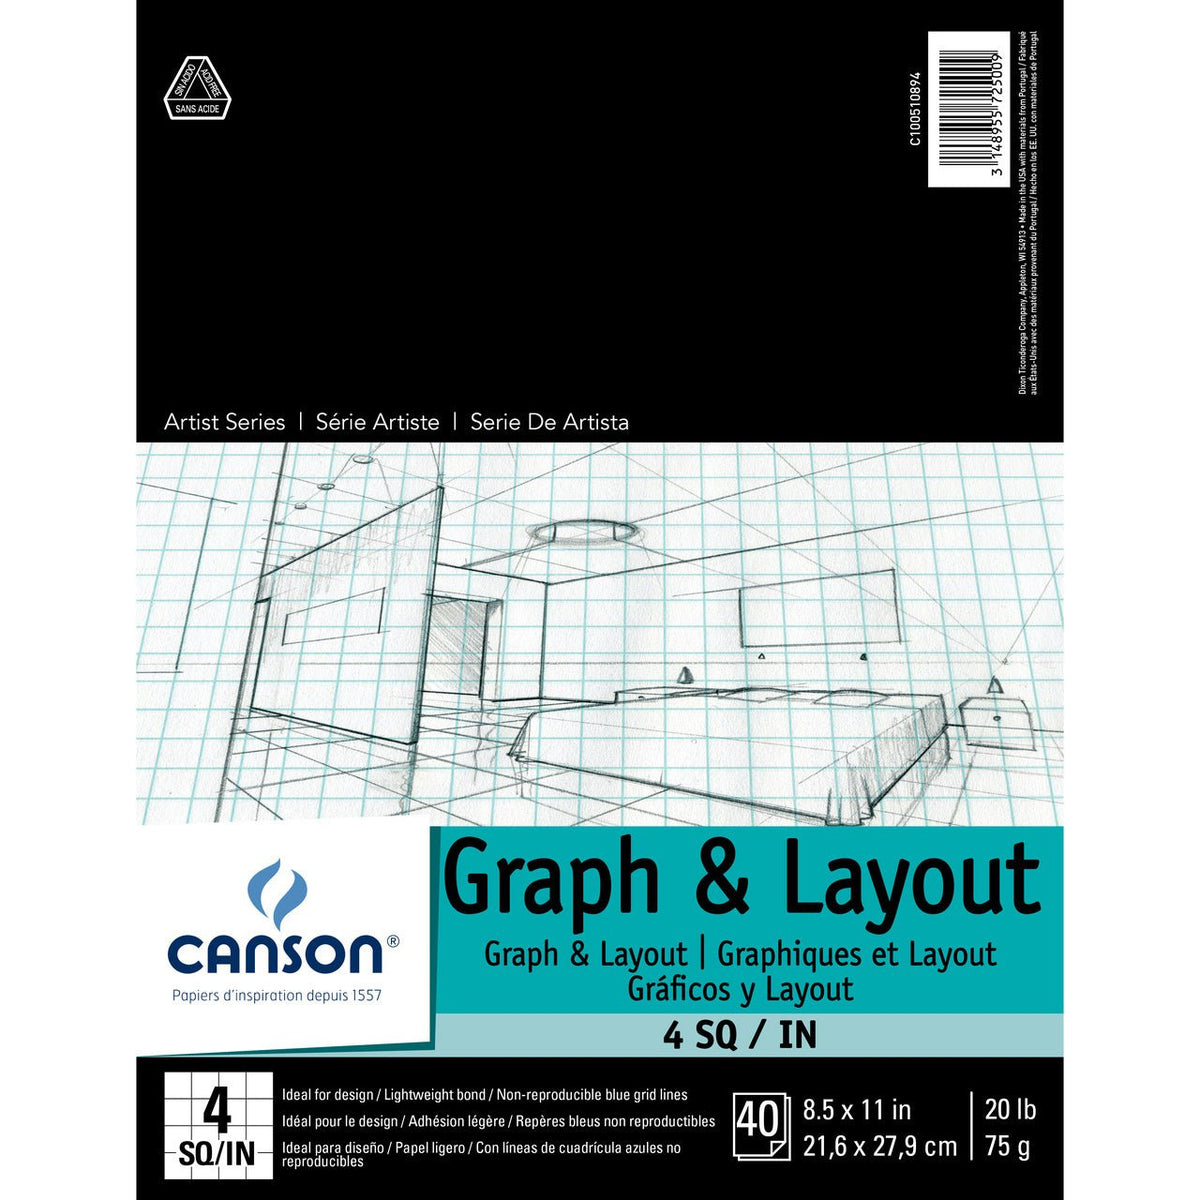 Canson Artist Series Pro-Layout Marker Pad, 14 x 17 50, Sheets